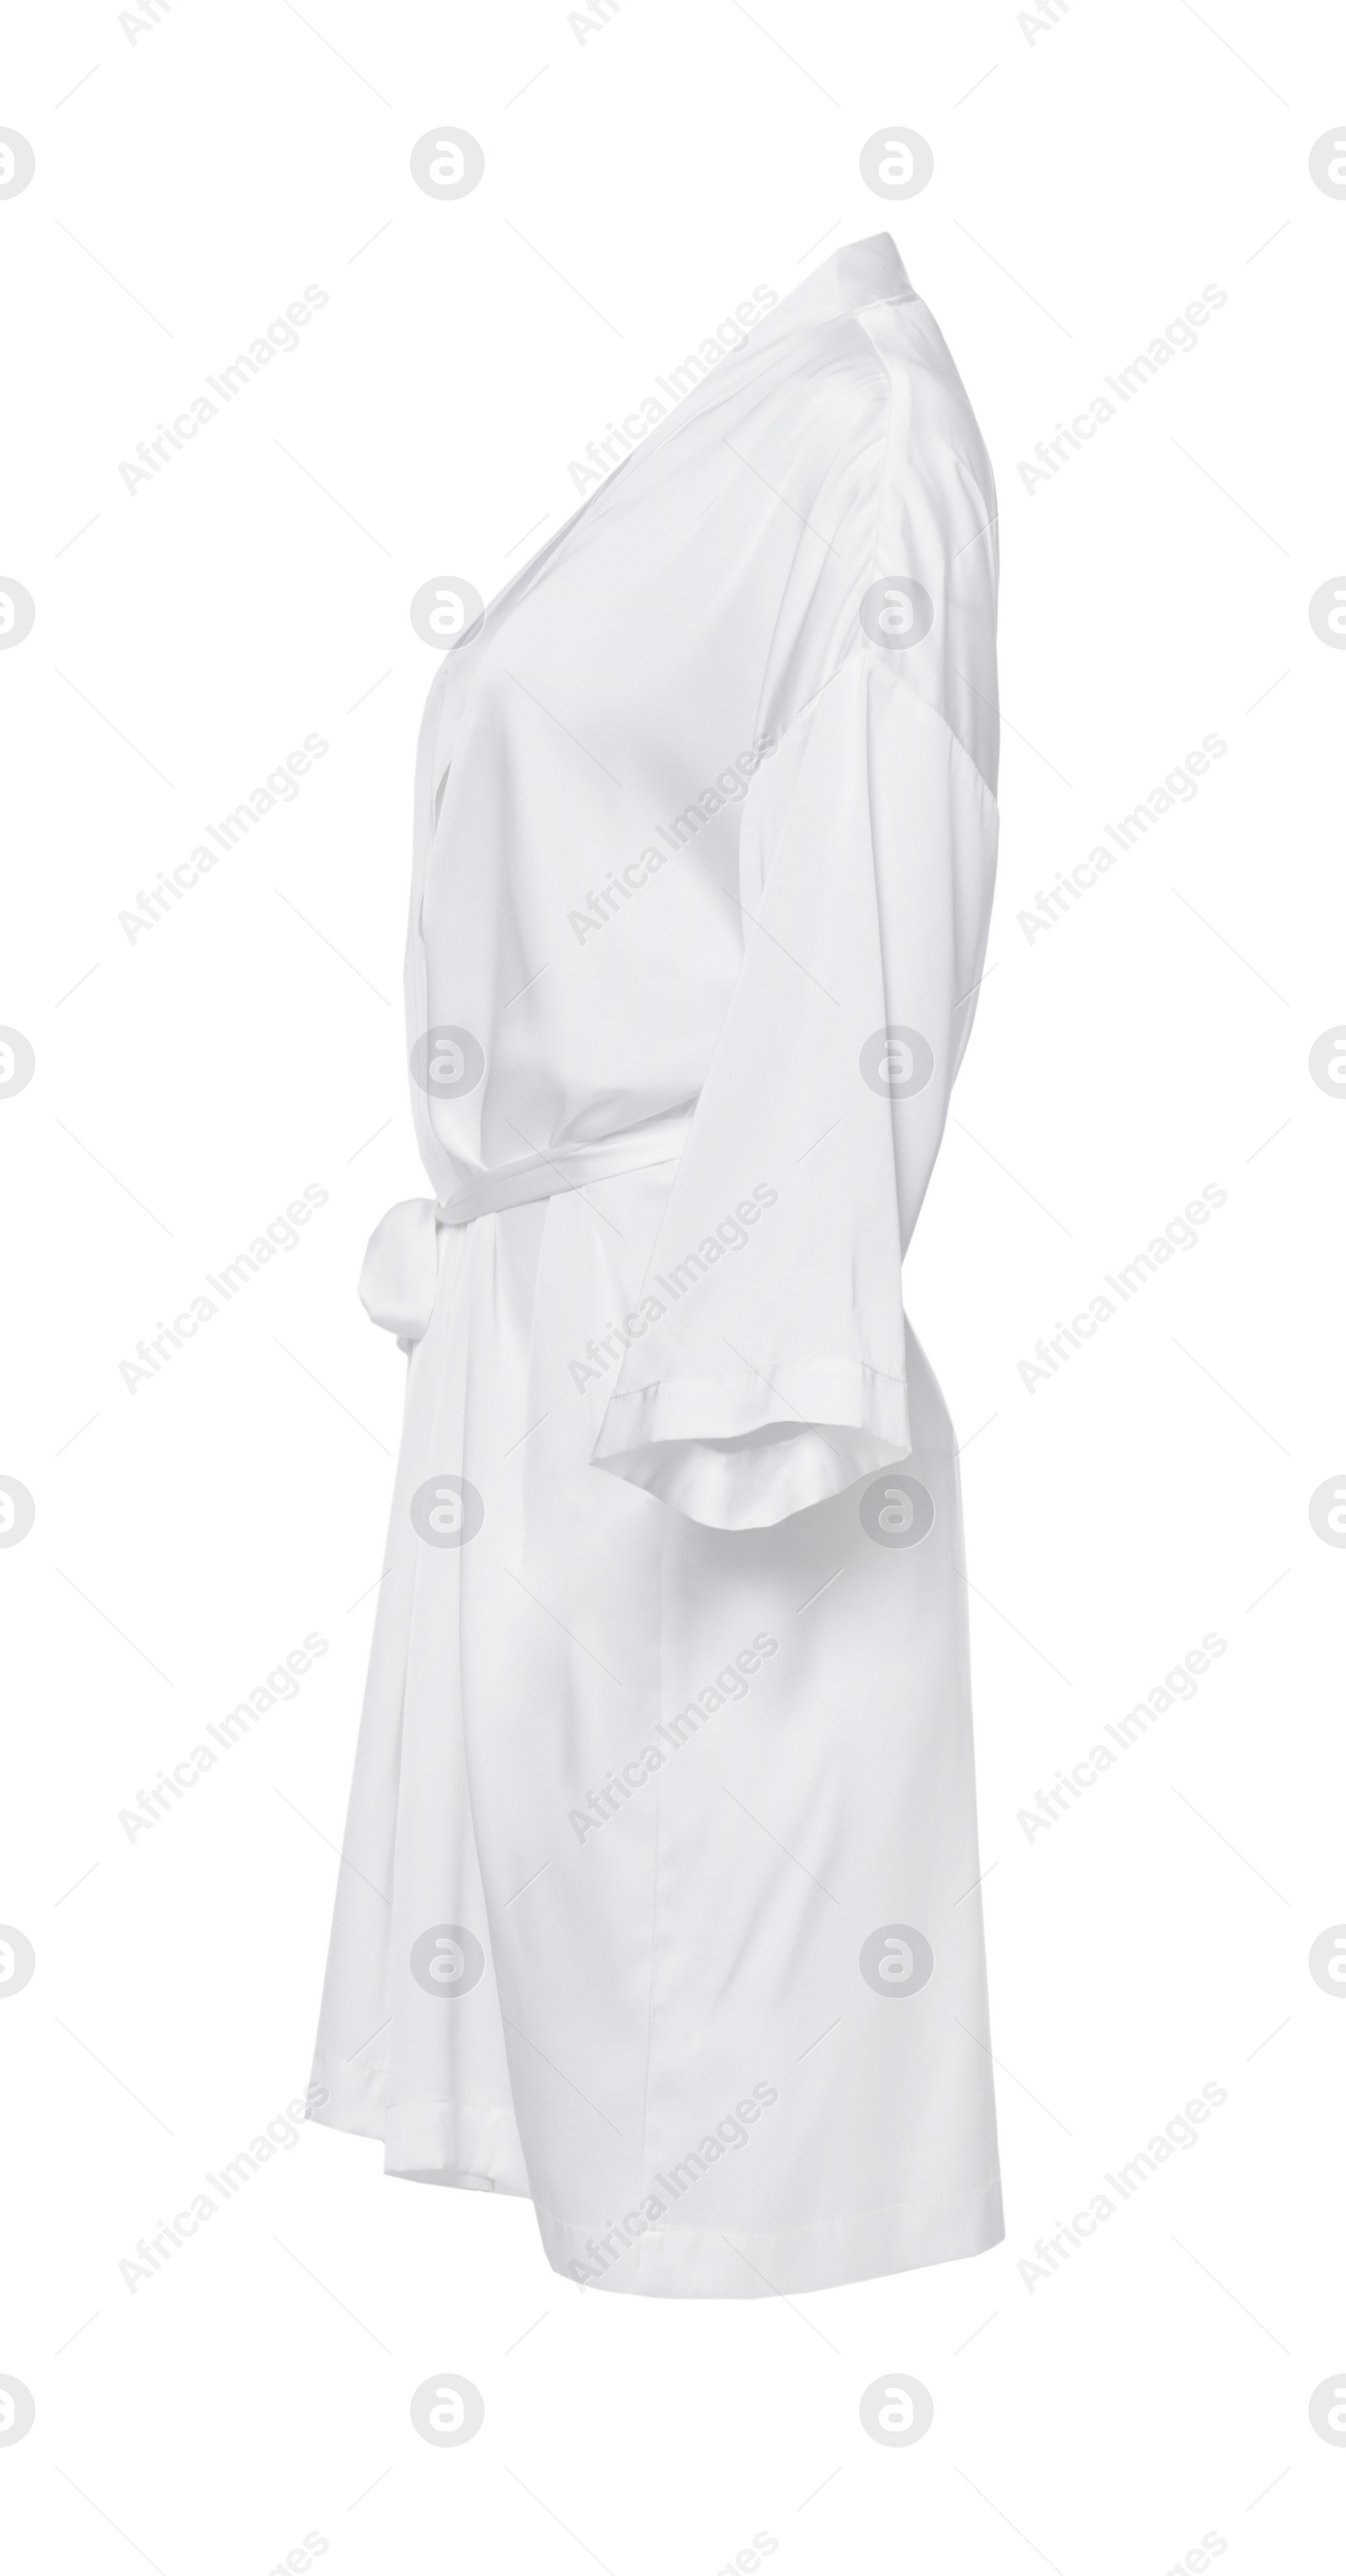 Image of Clean silk bathrobe with belt isolated on white, side view